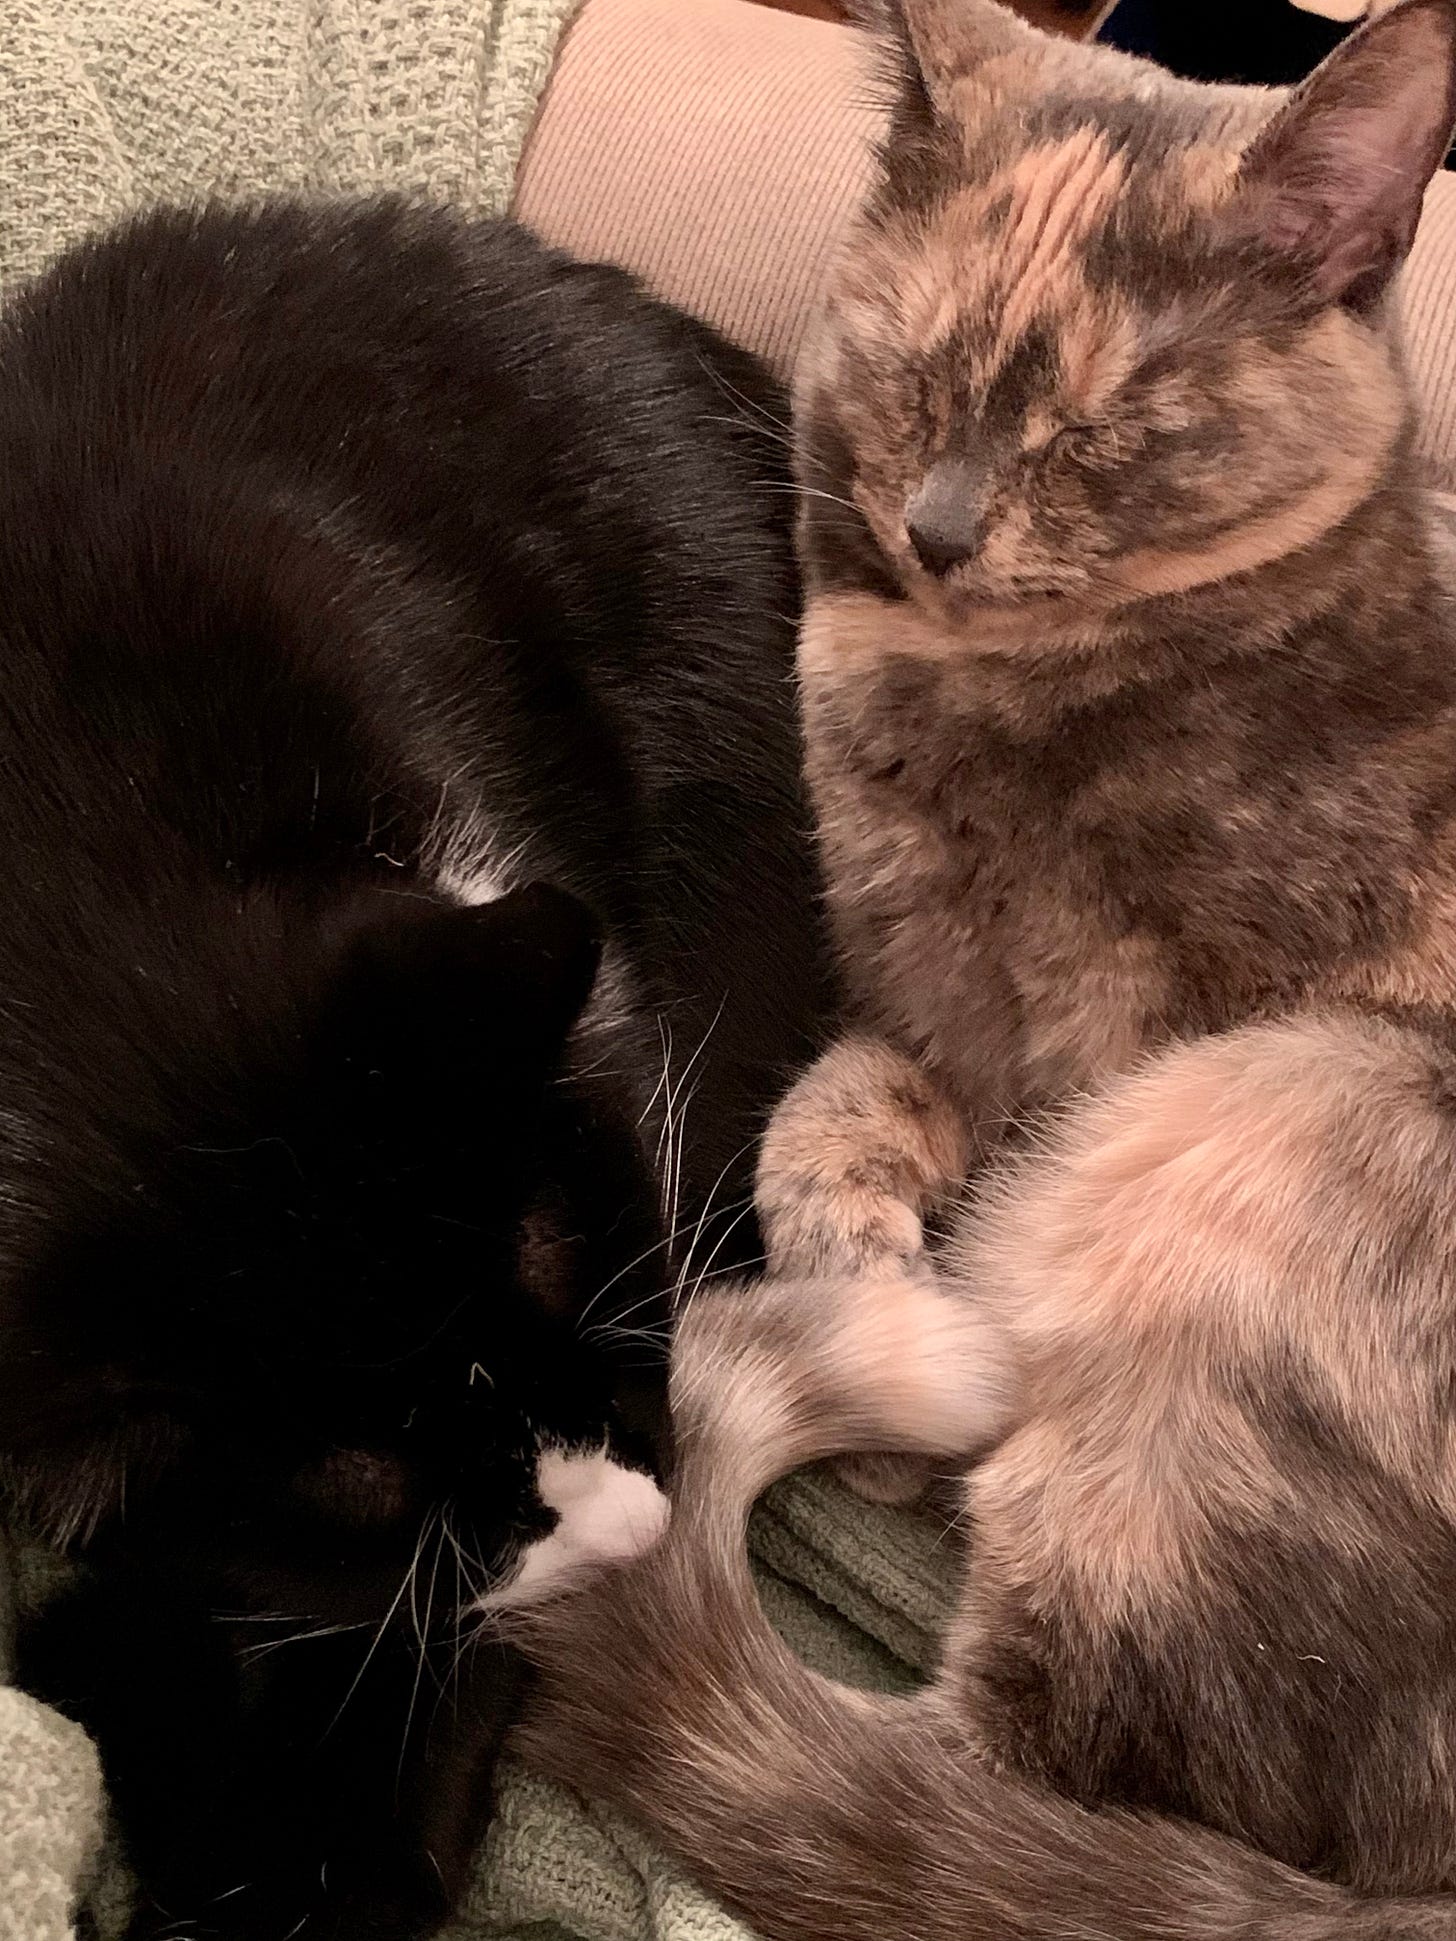 A tuxedo cat is sleeping in the left-hand side of the frame, with his head near the bottom of the photo. To the right, his dilute tortie sister sits upright with her ears perked up but her eyes gently shut.